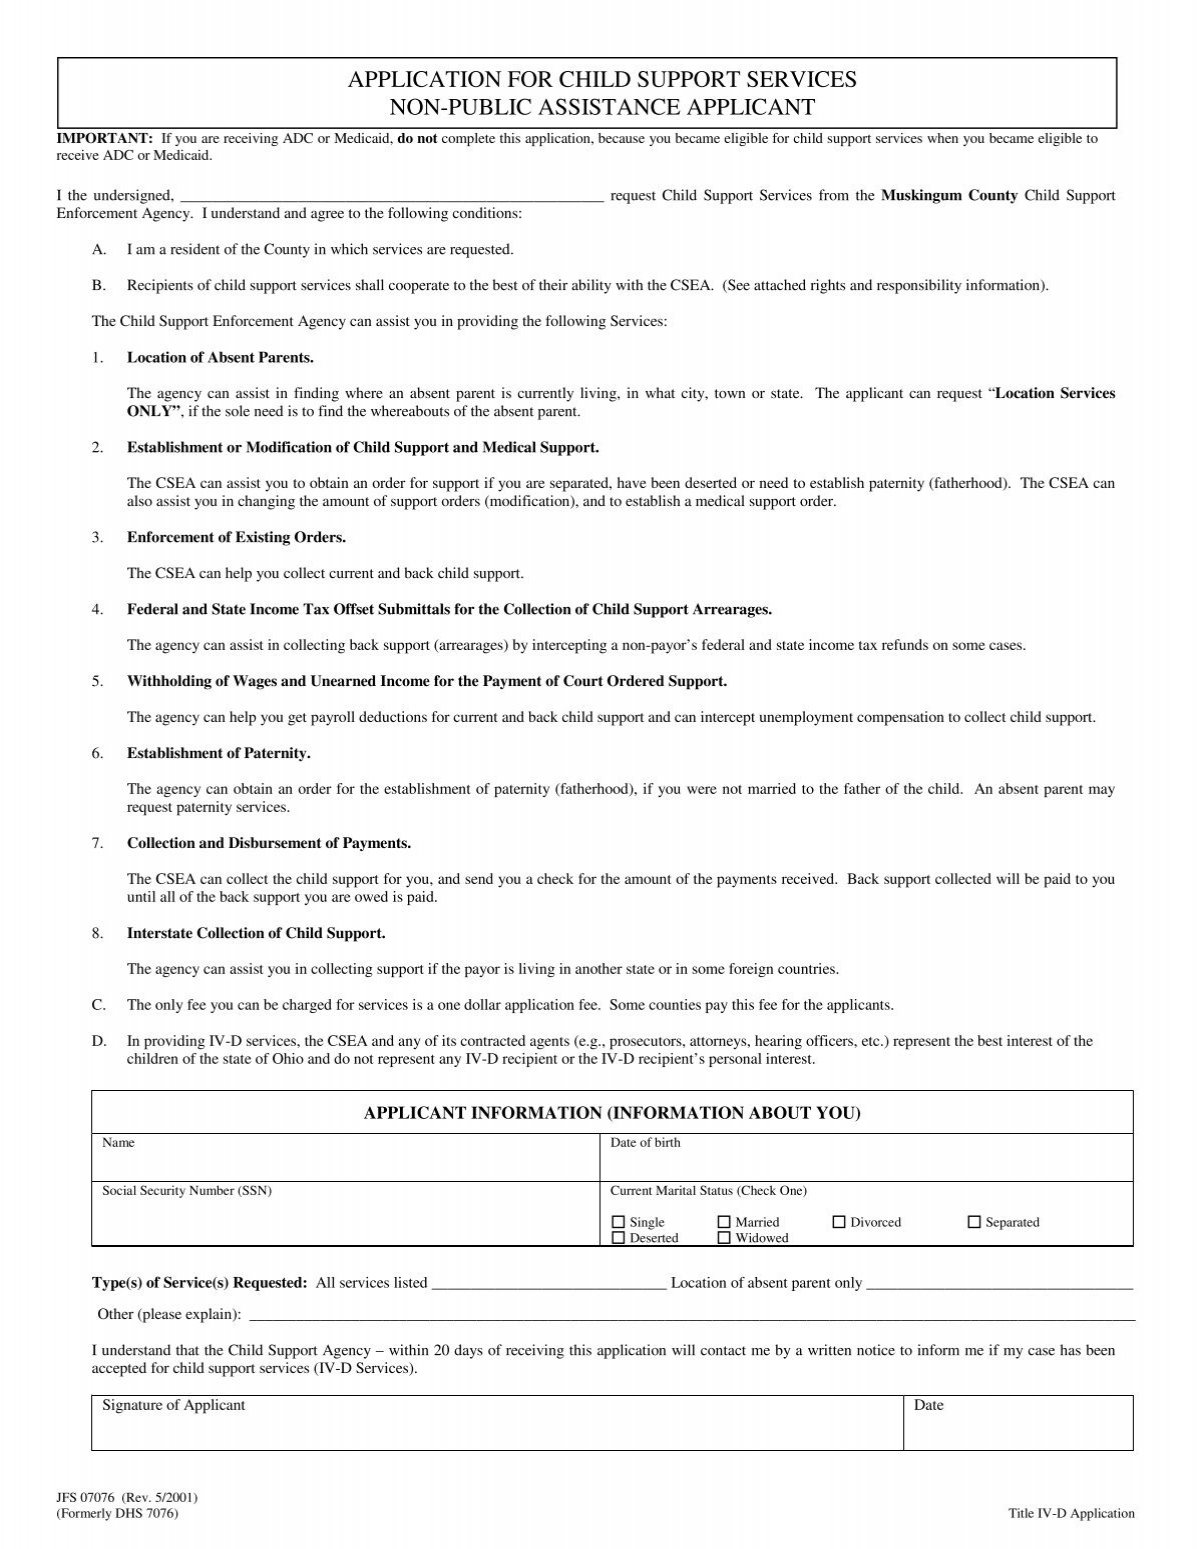 Title IV D Application Clerk of Courts Muskingum County